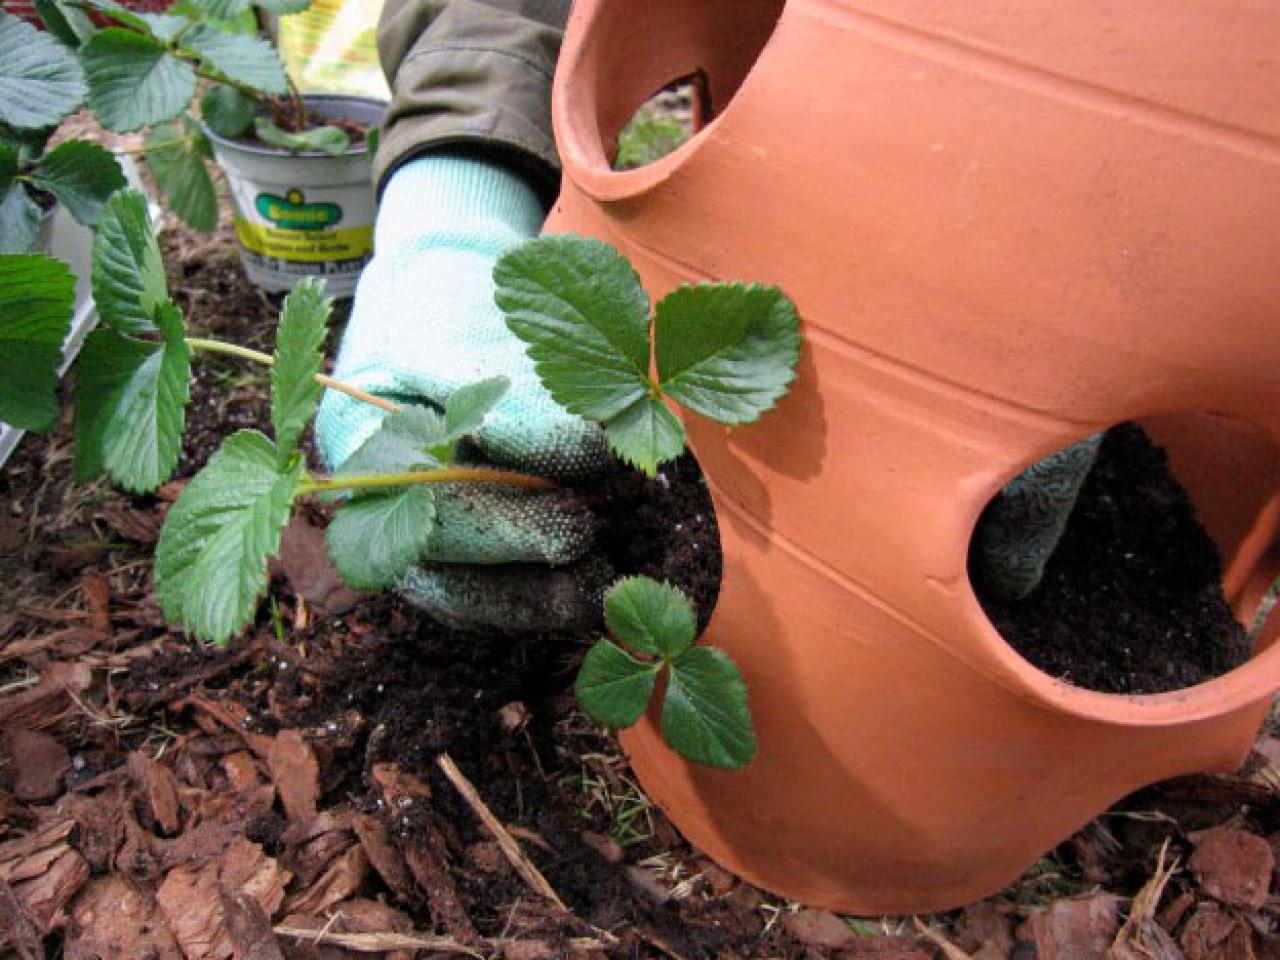 What is the proper way to care for strawberry plants?